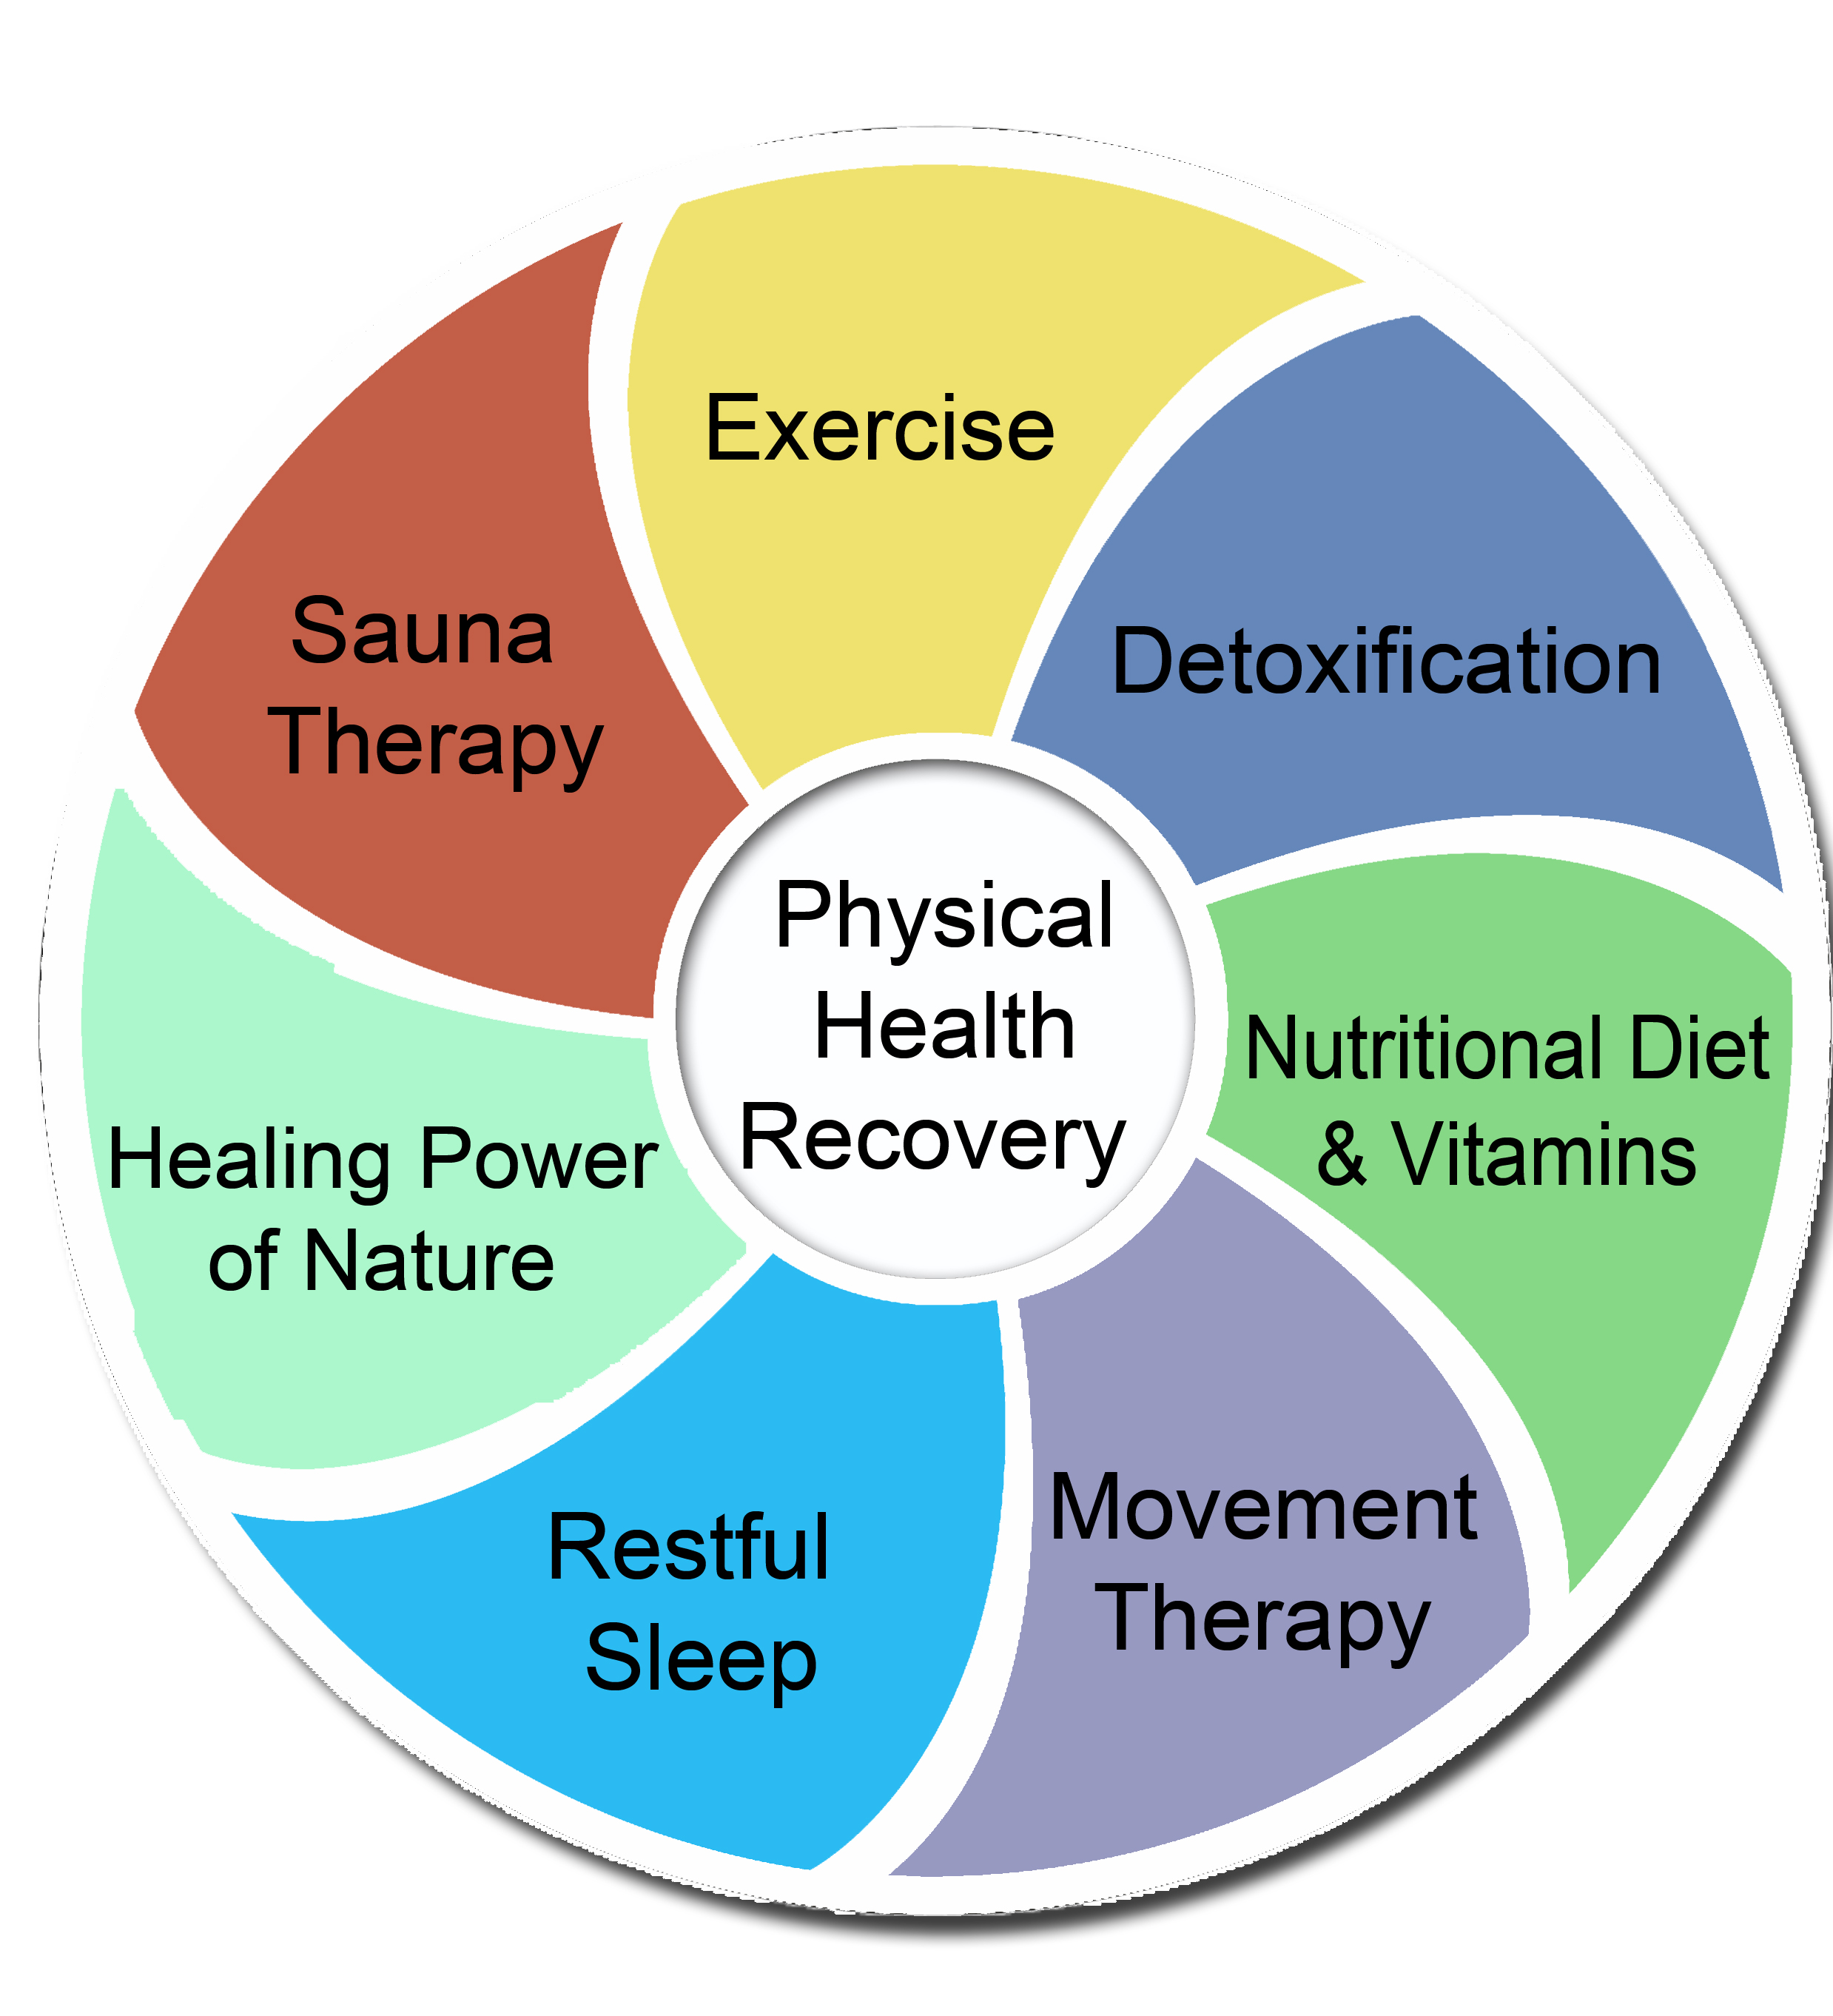 components of physical health